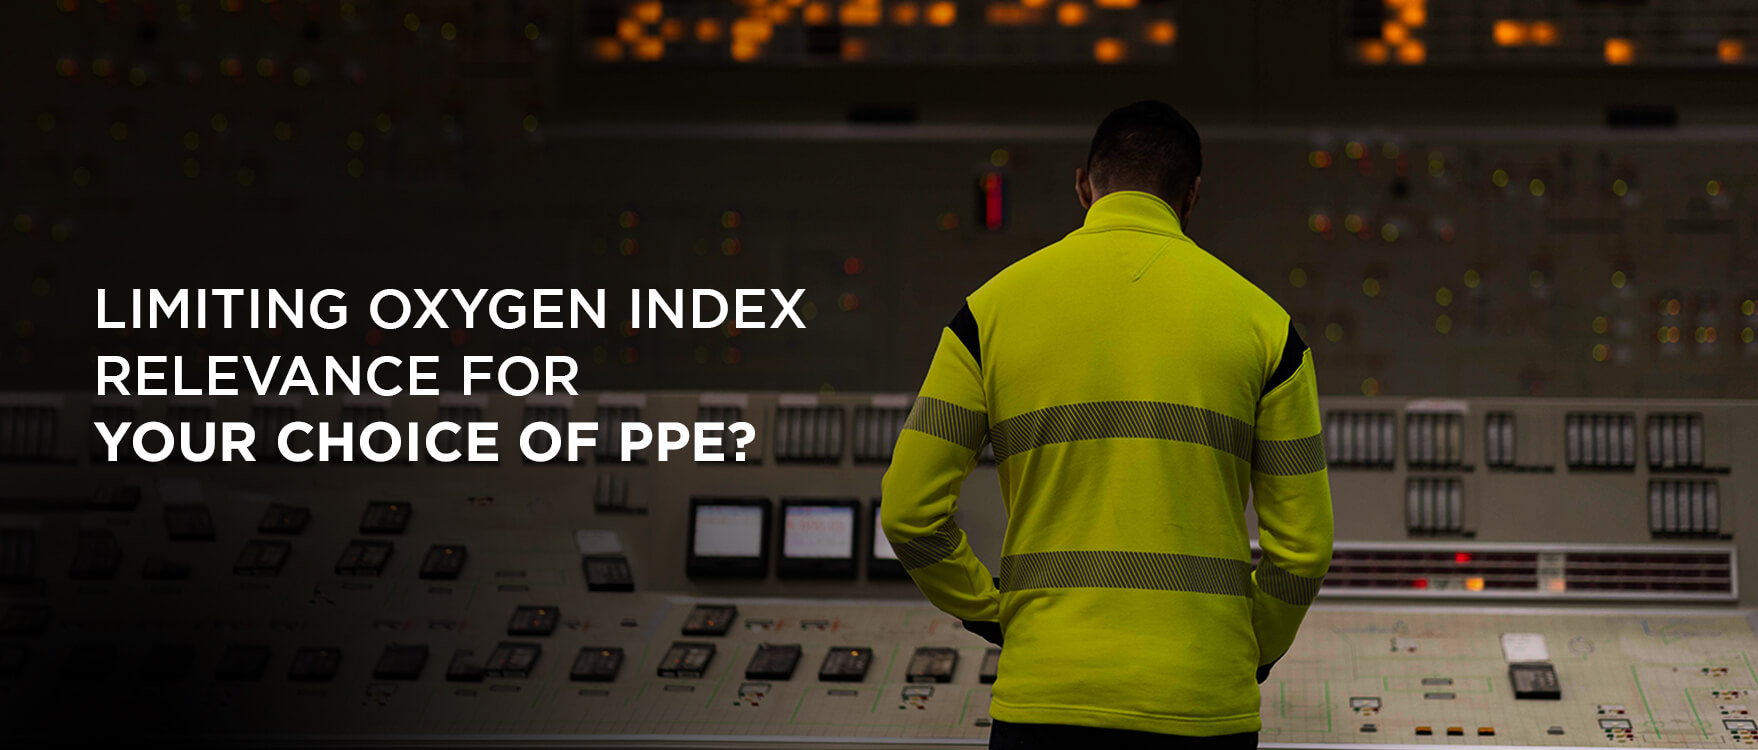 Limiting Oxygen Index Relevance for your choice of PPE?